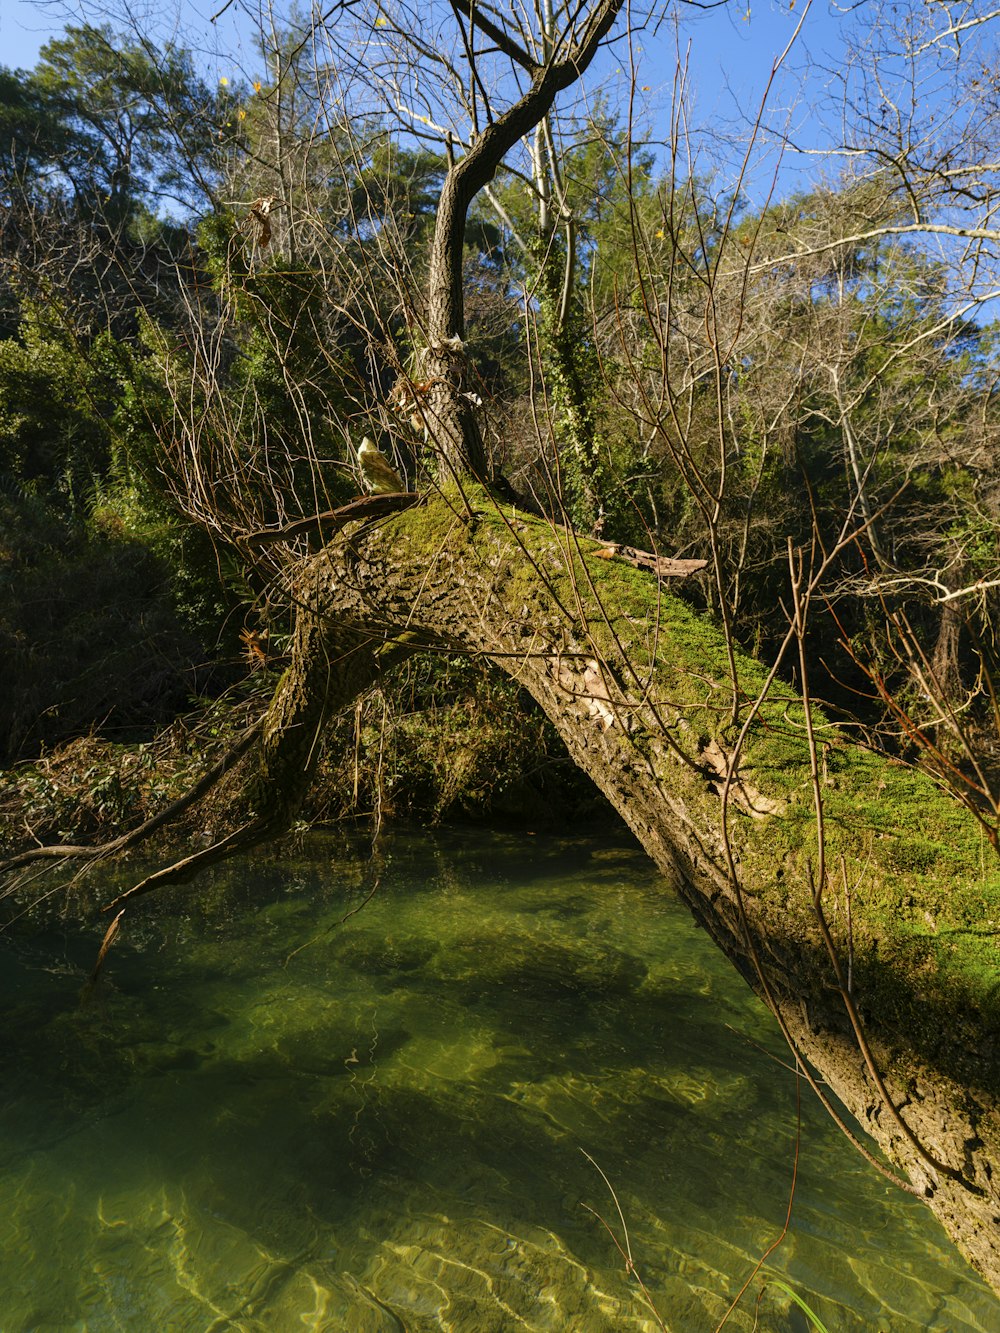 a tree leaning over a body of water